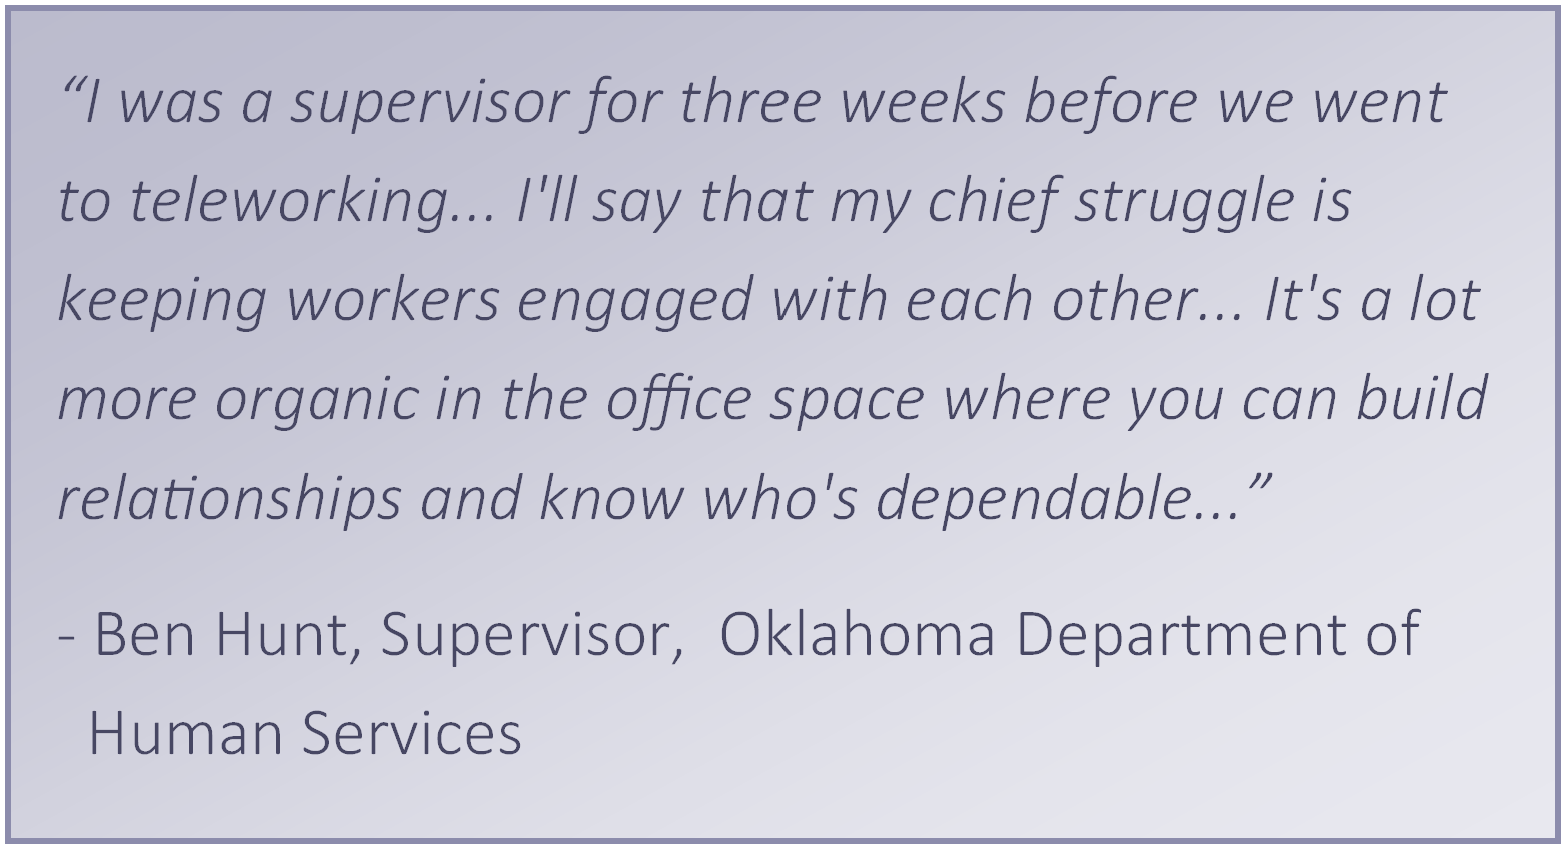 “I was a supervisor for three weeks before we went to teleworking... I'll say that my chief struggle is keeping workers engaged with each other... It's a lot more organic in the office space where you can build relationships and know who's dependable...” 